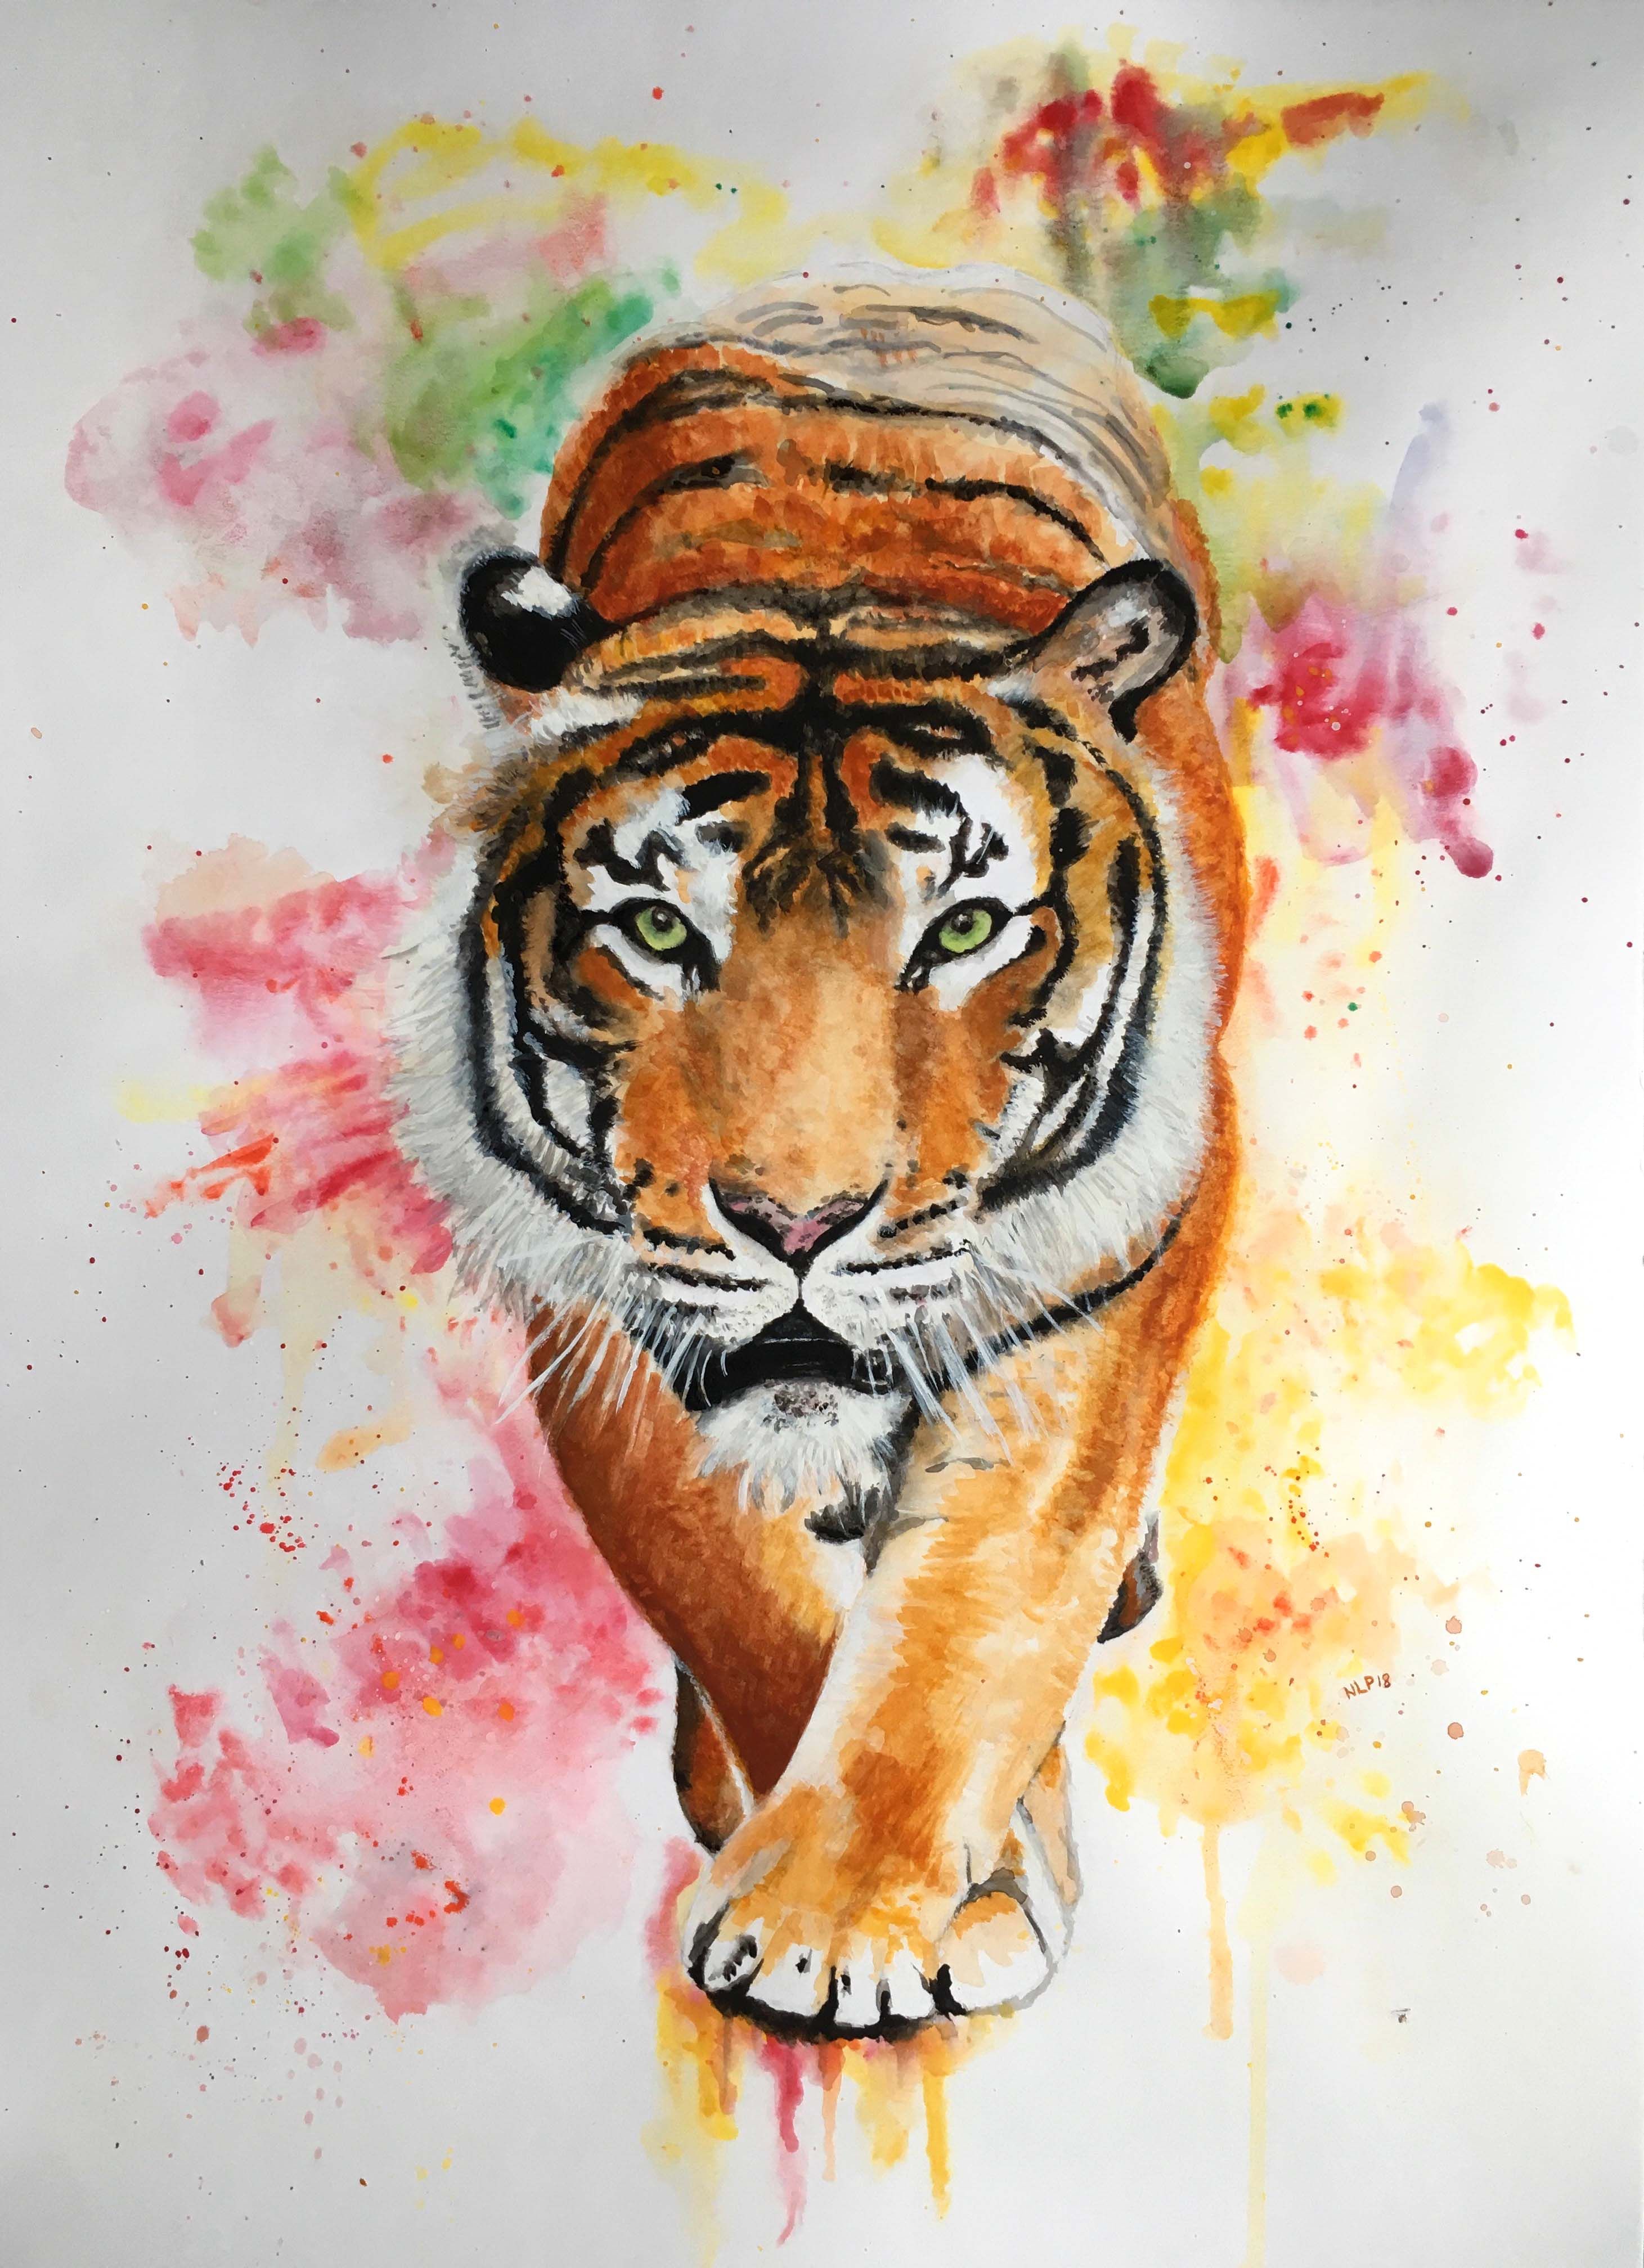 10 Cute Animal Watercolor Paintings in 2020 | Artisticaly - Inspect the